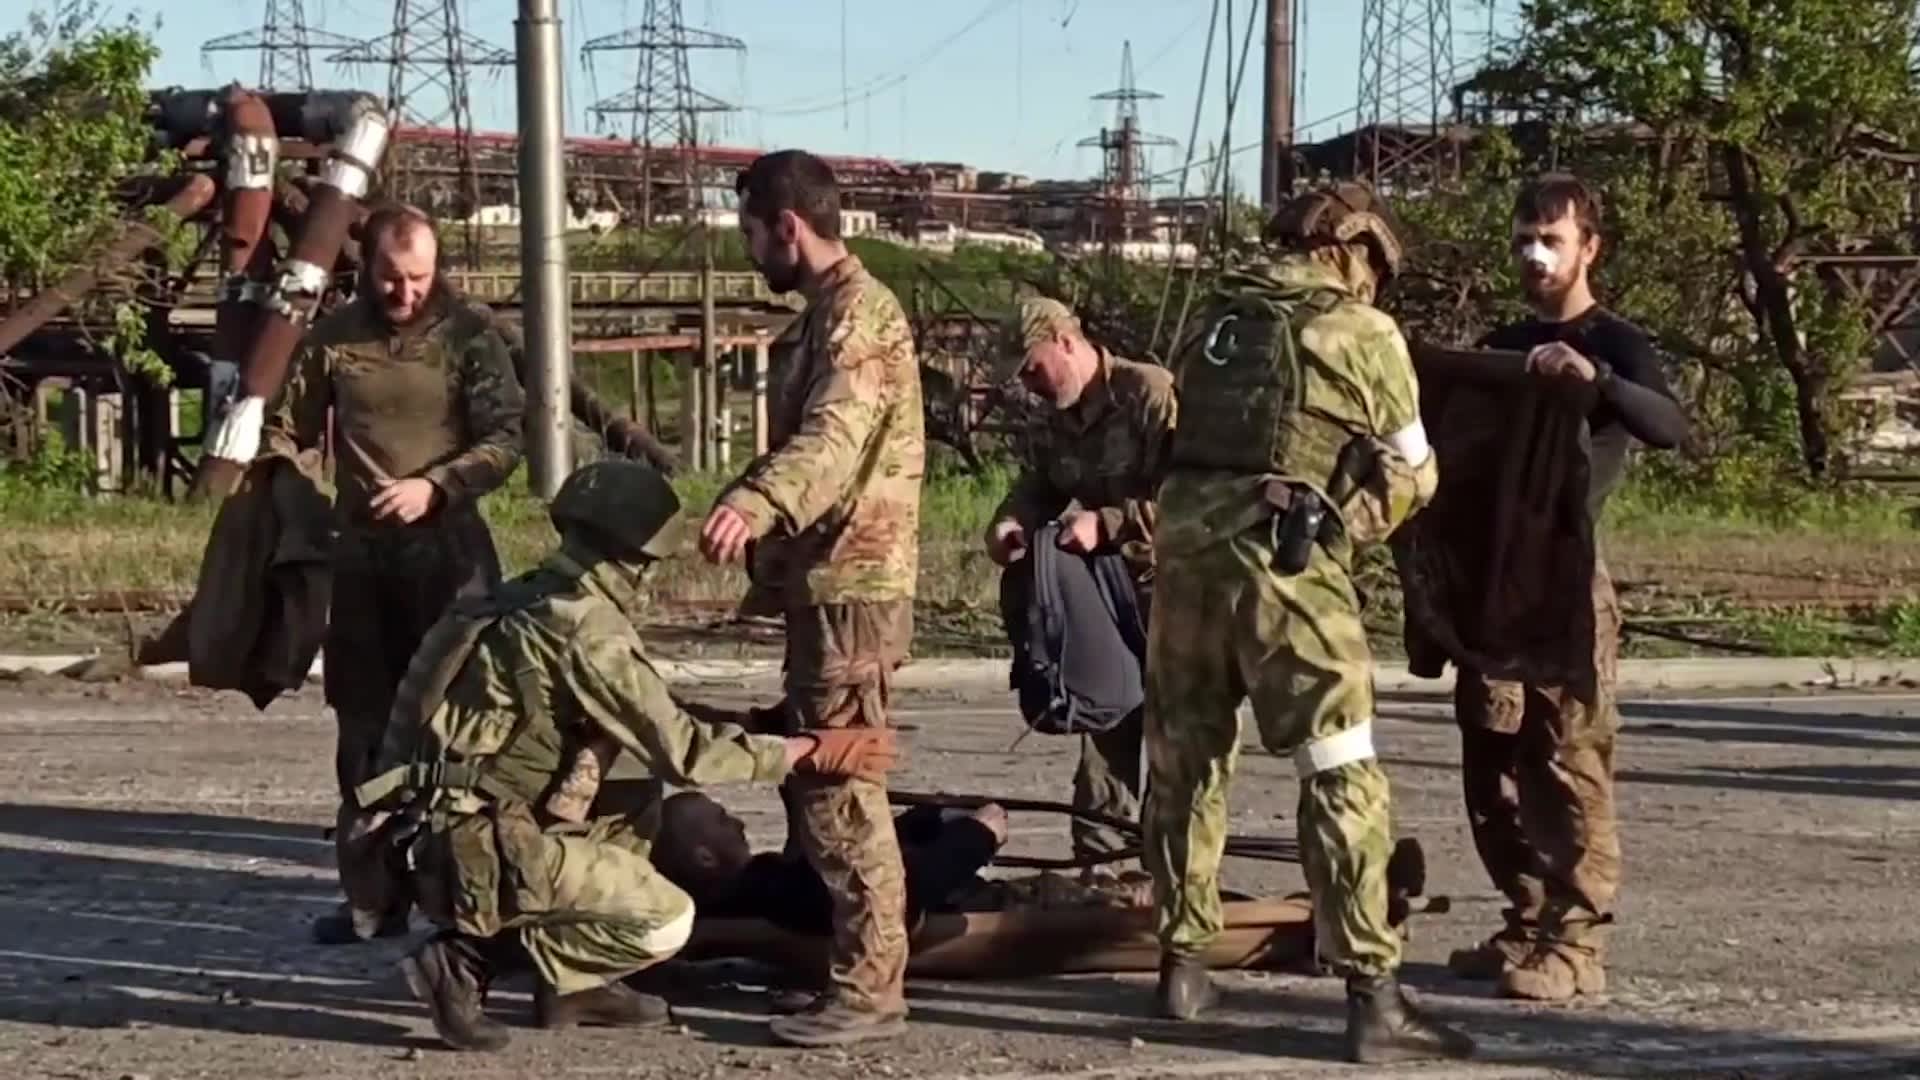 Mariupol's fate in limbo after steelworks evacuation; Russia plays down NATO expansion - CNBC : More than 260 Ukrainian fighters, including some who are badly wounded, have been evacuated from a steel plant in the ruined city of Mariupol.  | Tranquility 國際社群